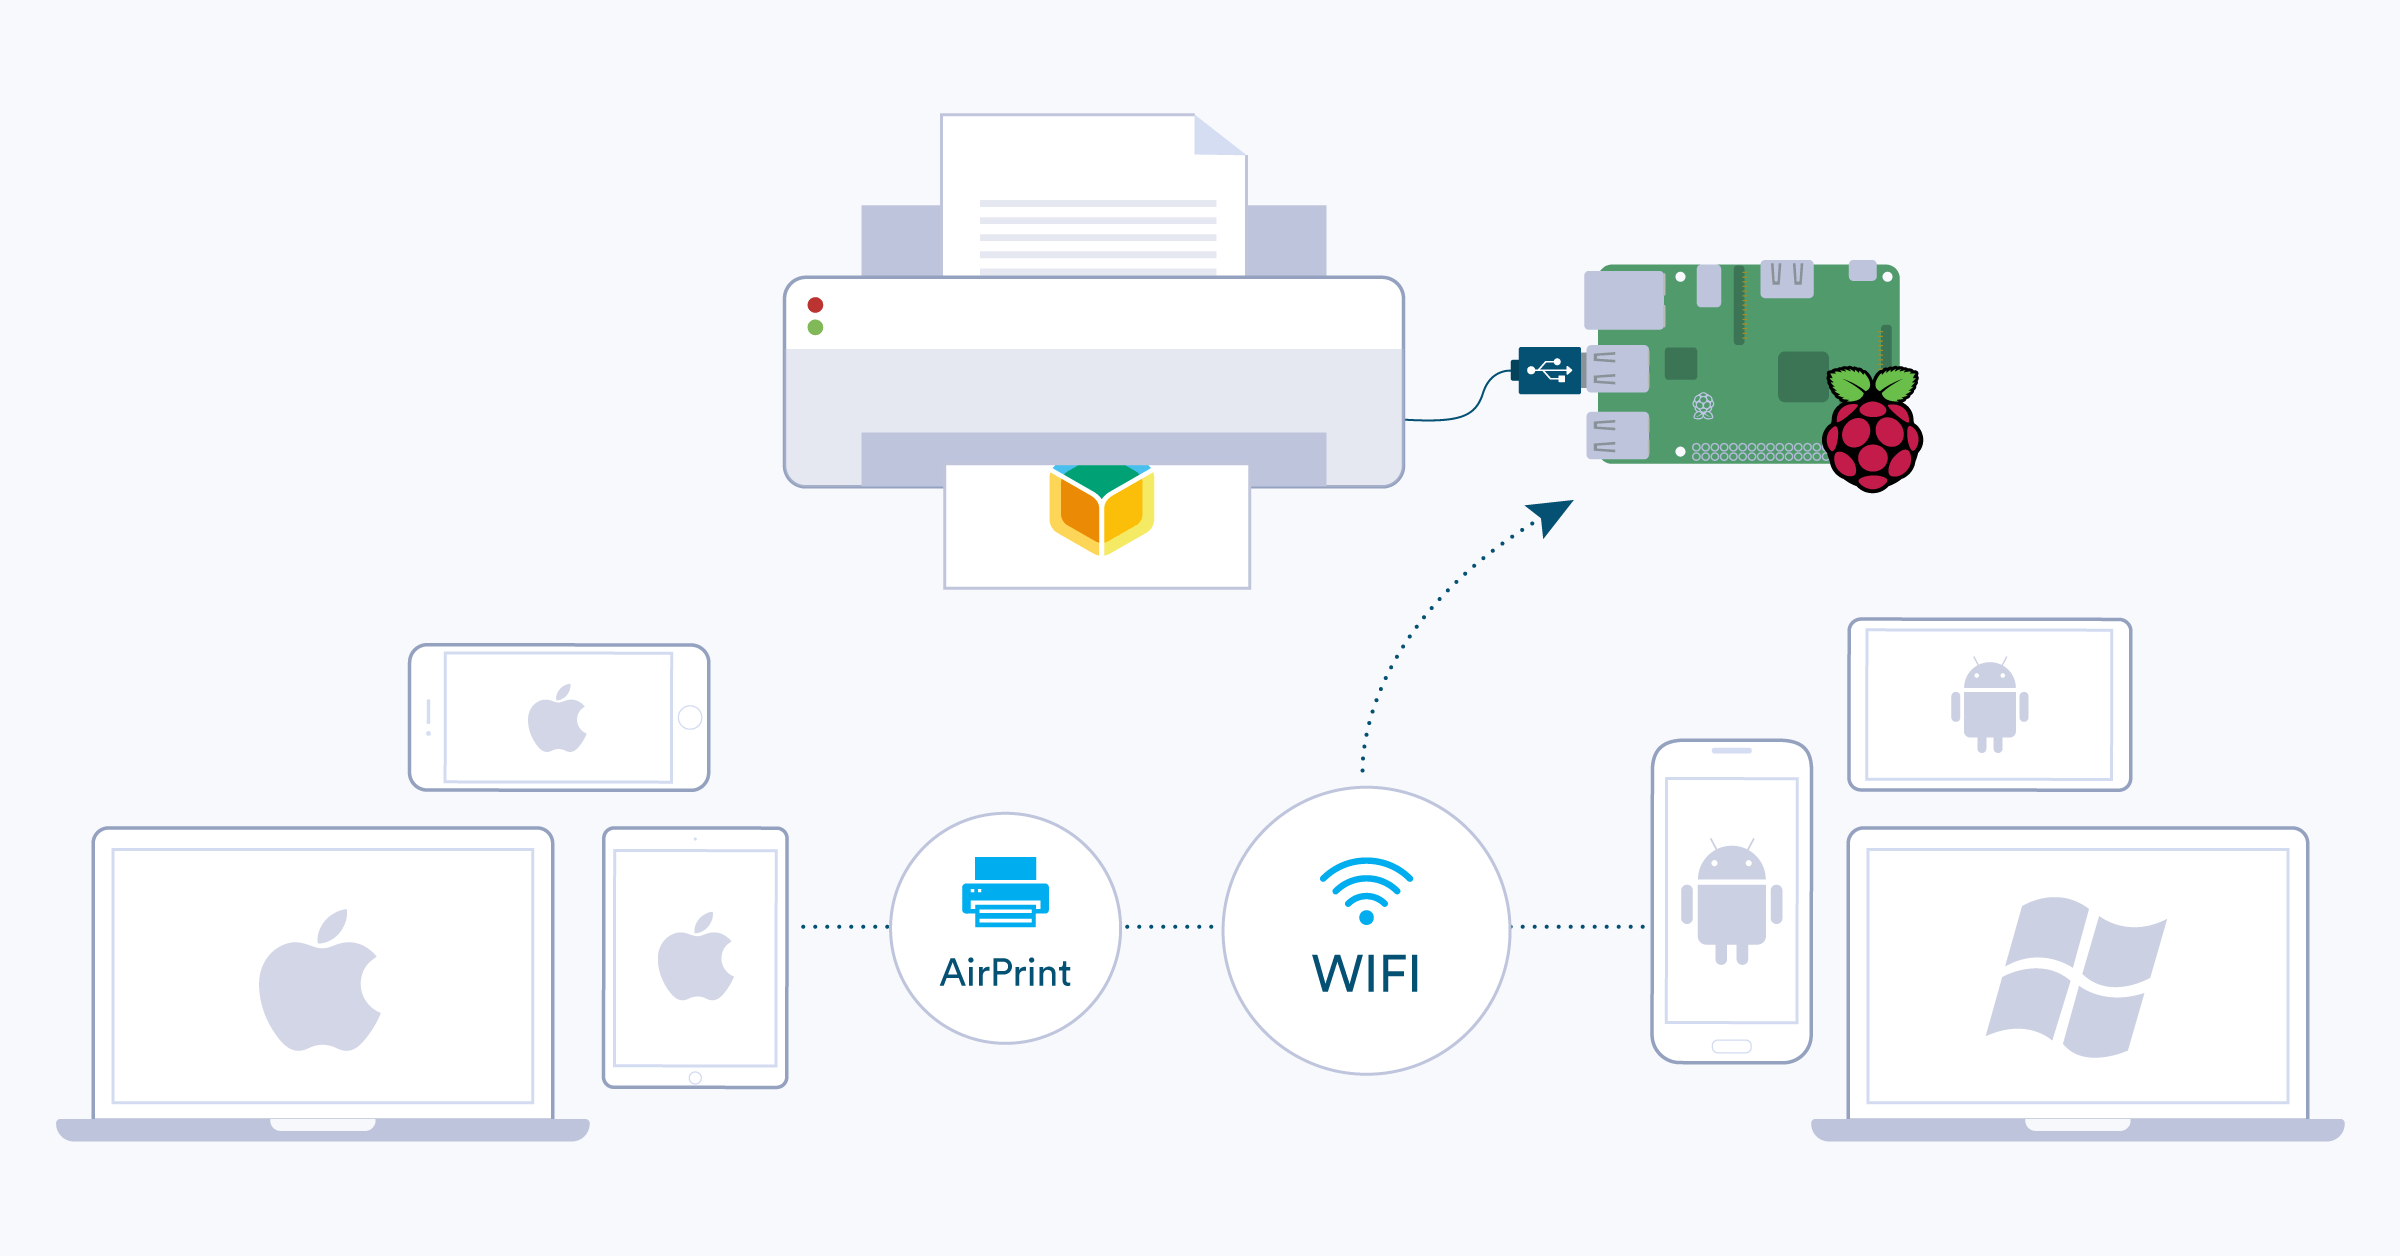 WiFi-enable USB printers with a Raspberry Pi and share it over your network